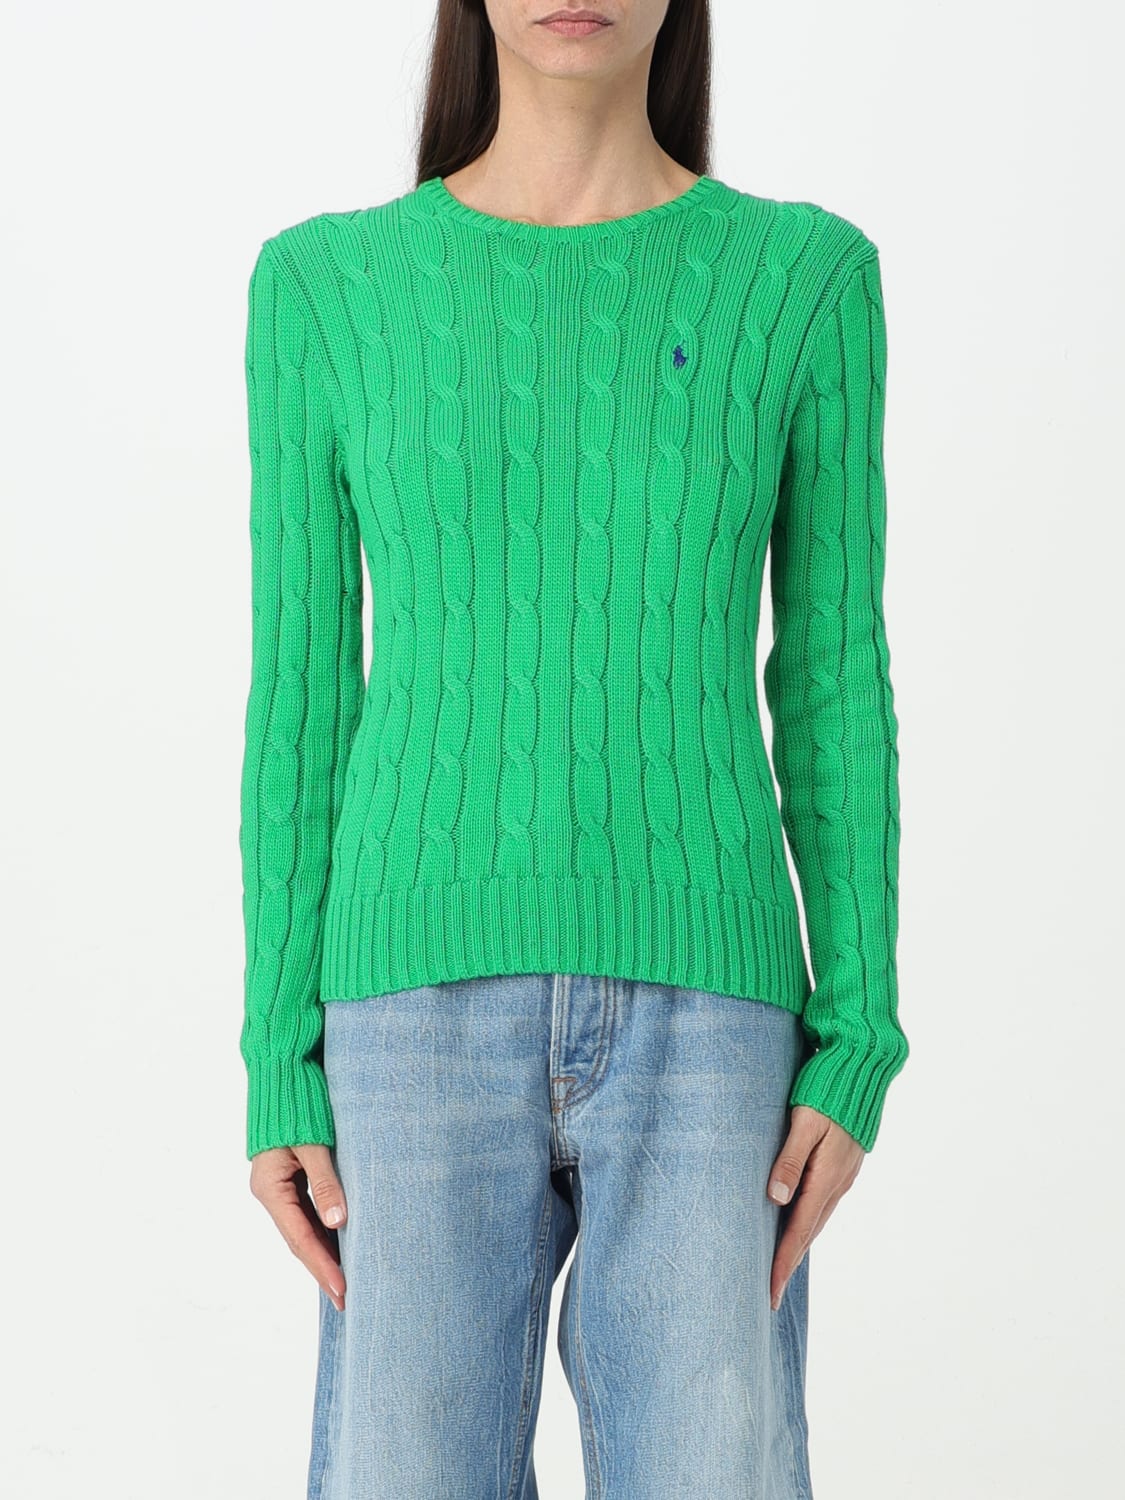 Polo Ralph Lauren Cable-Knit Sweater - Green - XS